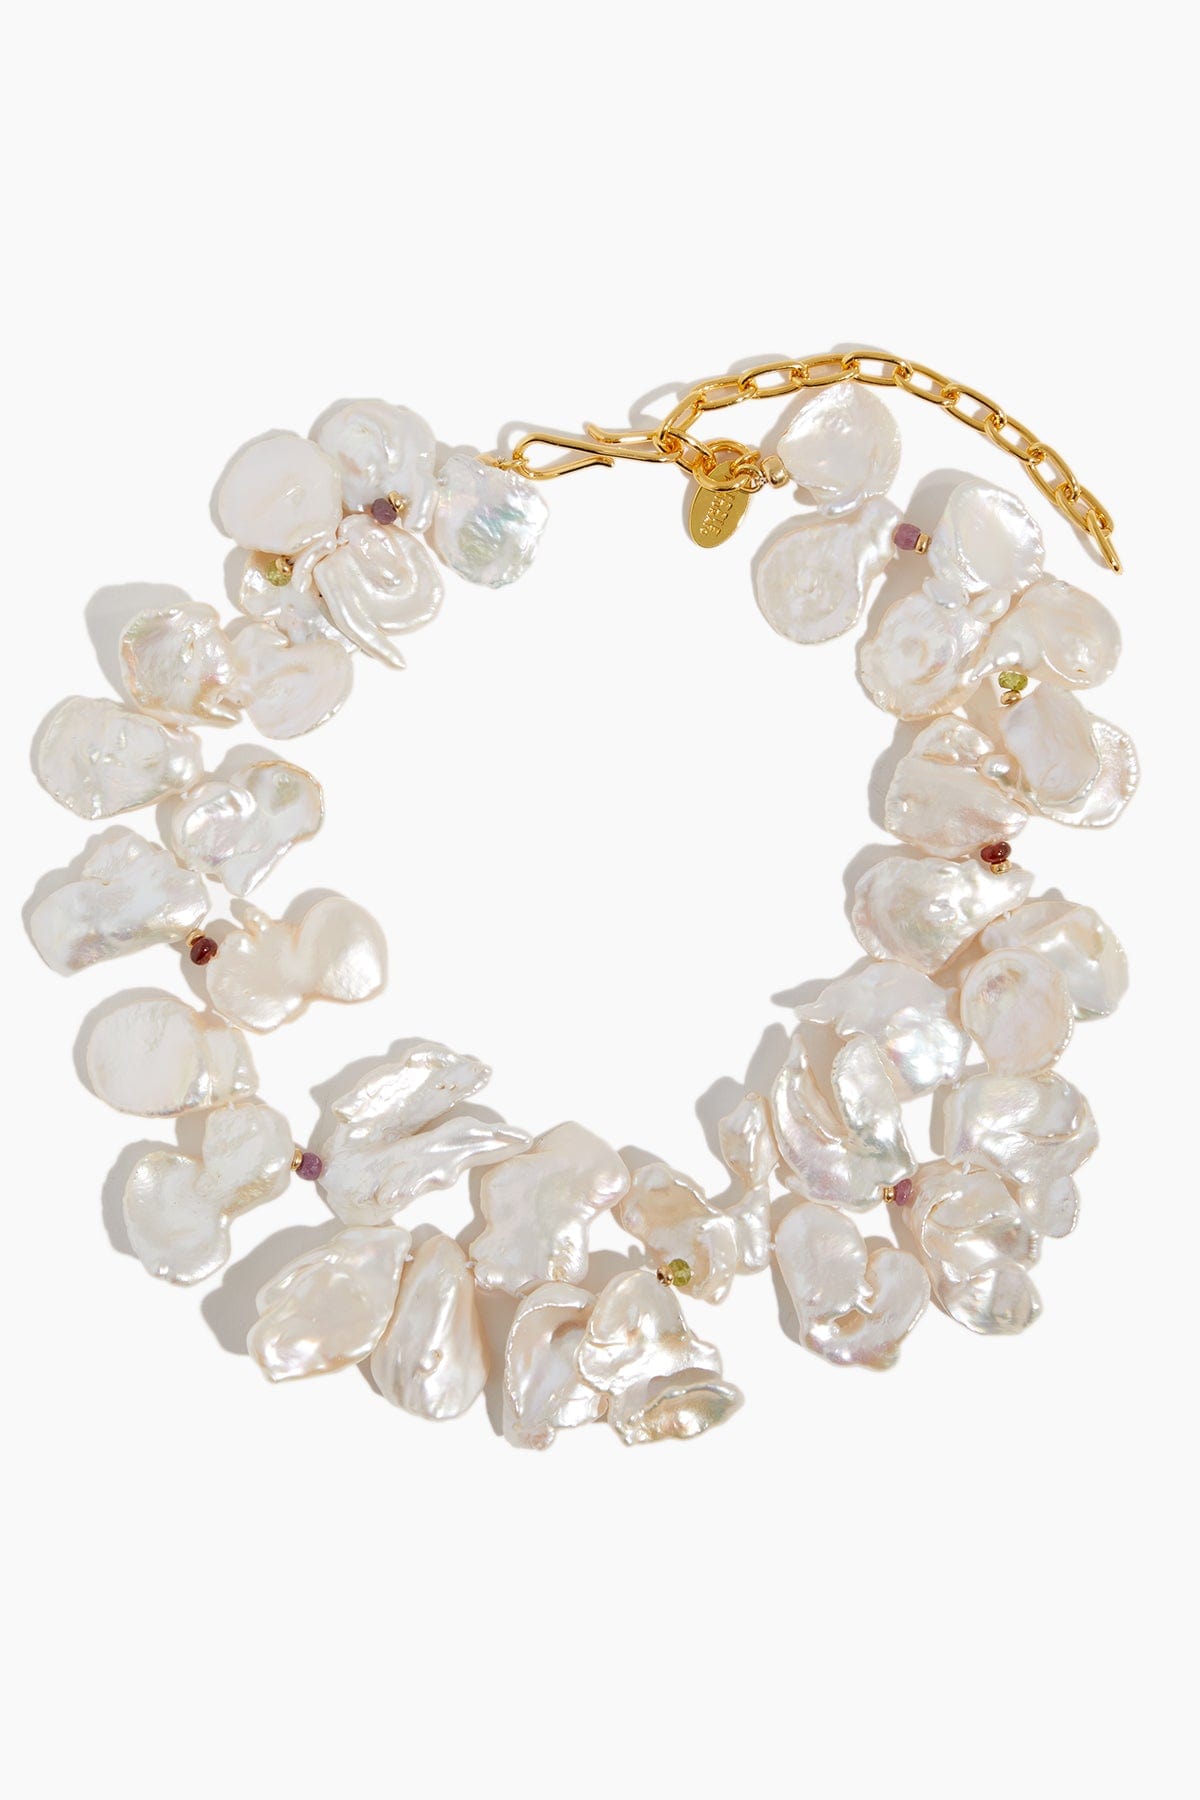 Lizzie Fortunato Necklaces Moonflower Necklace in White